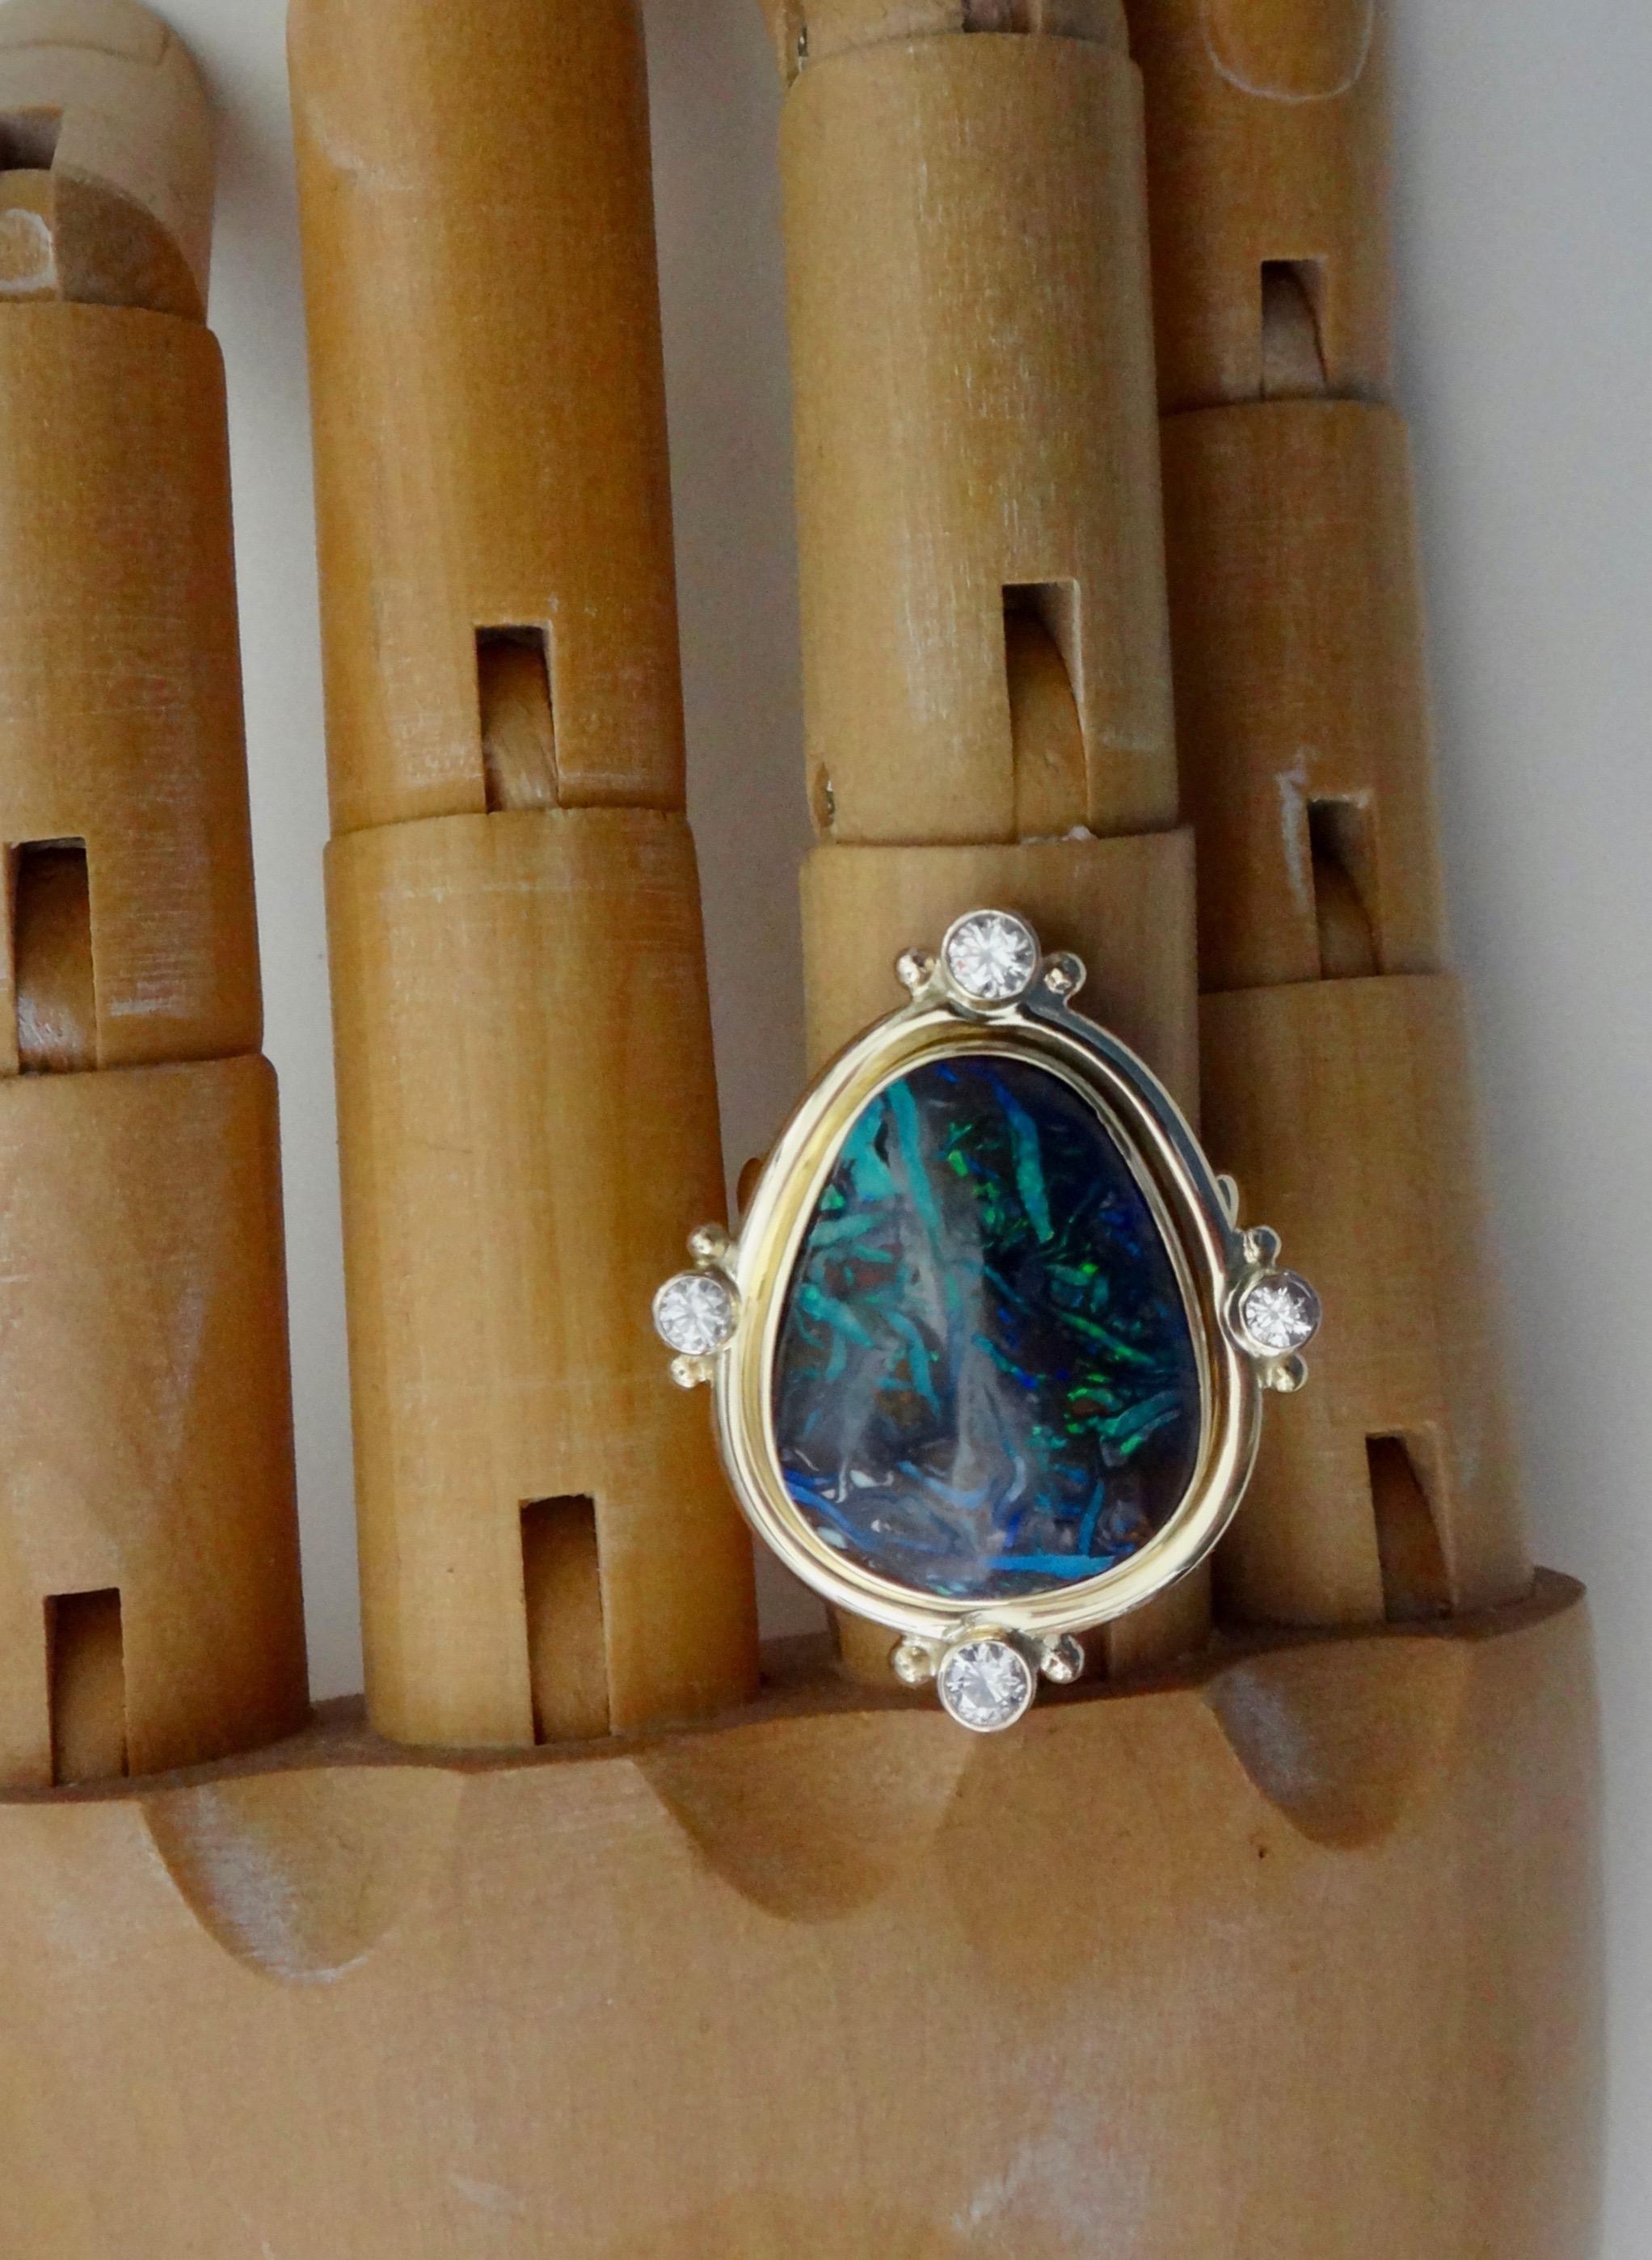 Boulder Opal (origin: Queensland, Australia) of a free-form shape is featured in this one-of-a-kind cocktail ring.  